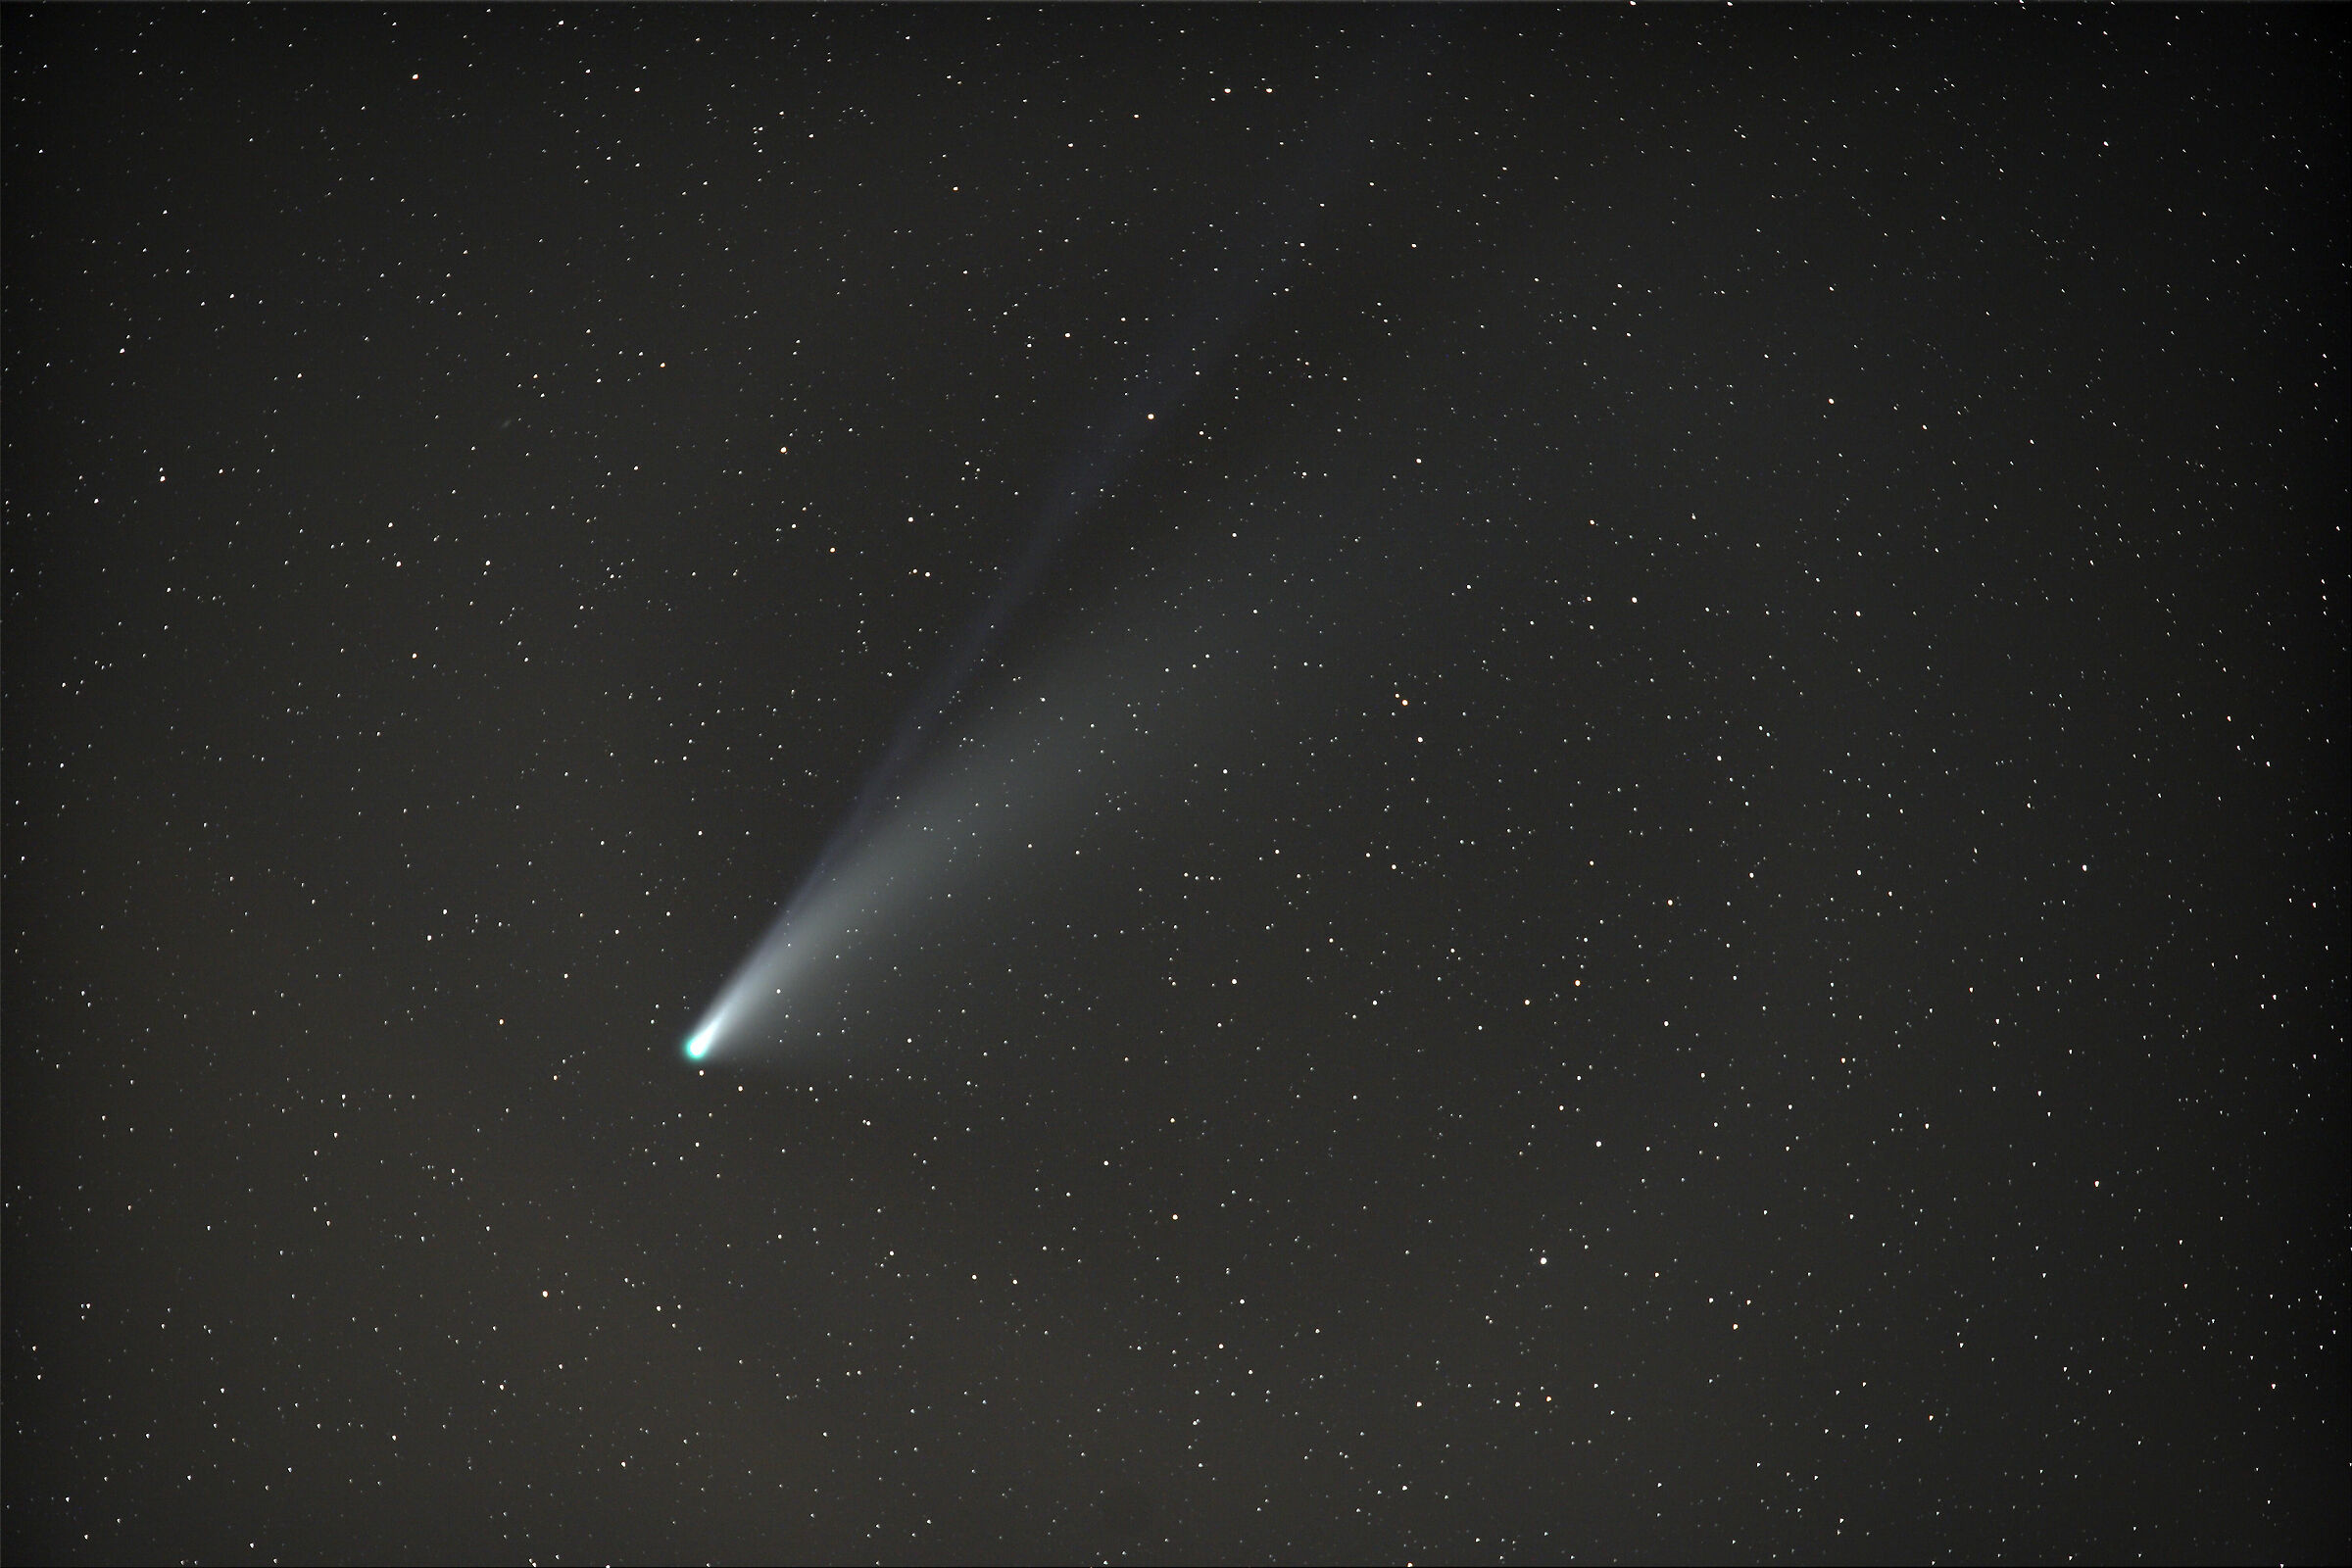 Comet Neowise of 21/07/2020 photo with astro-pursuer...